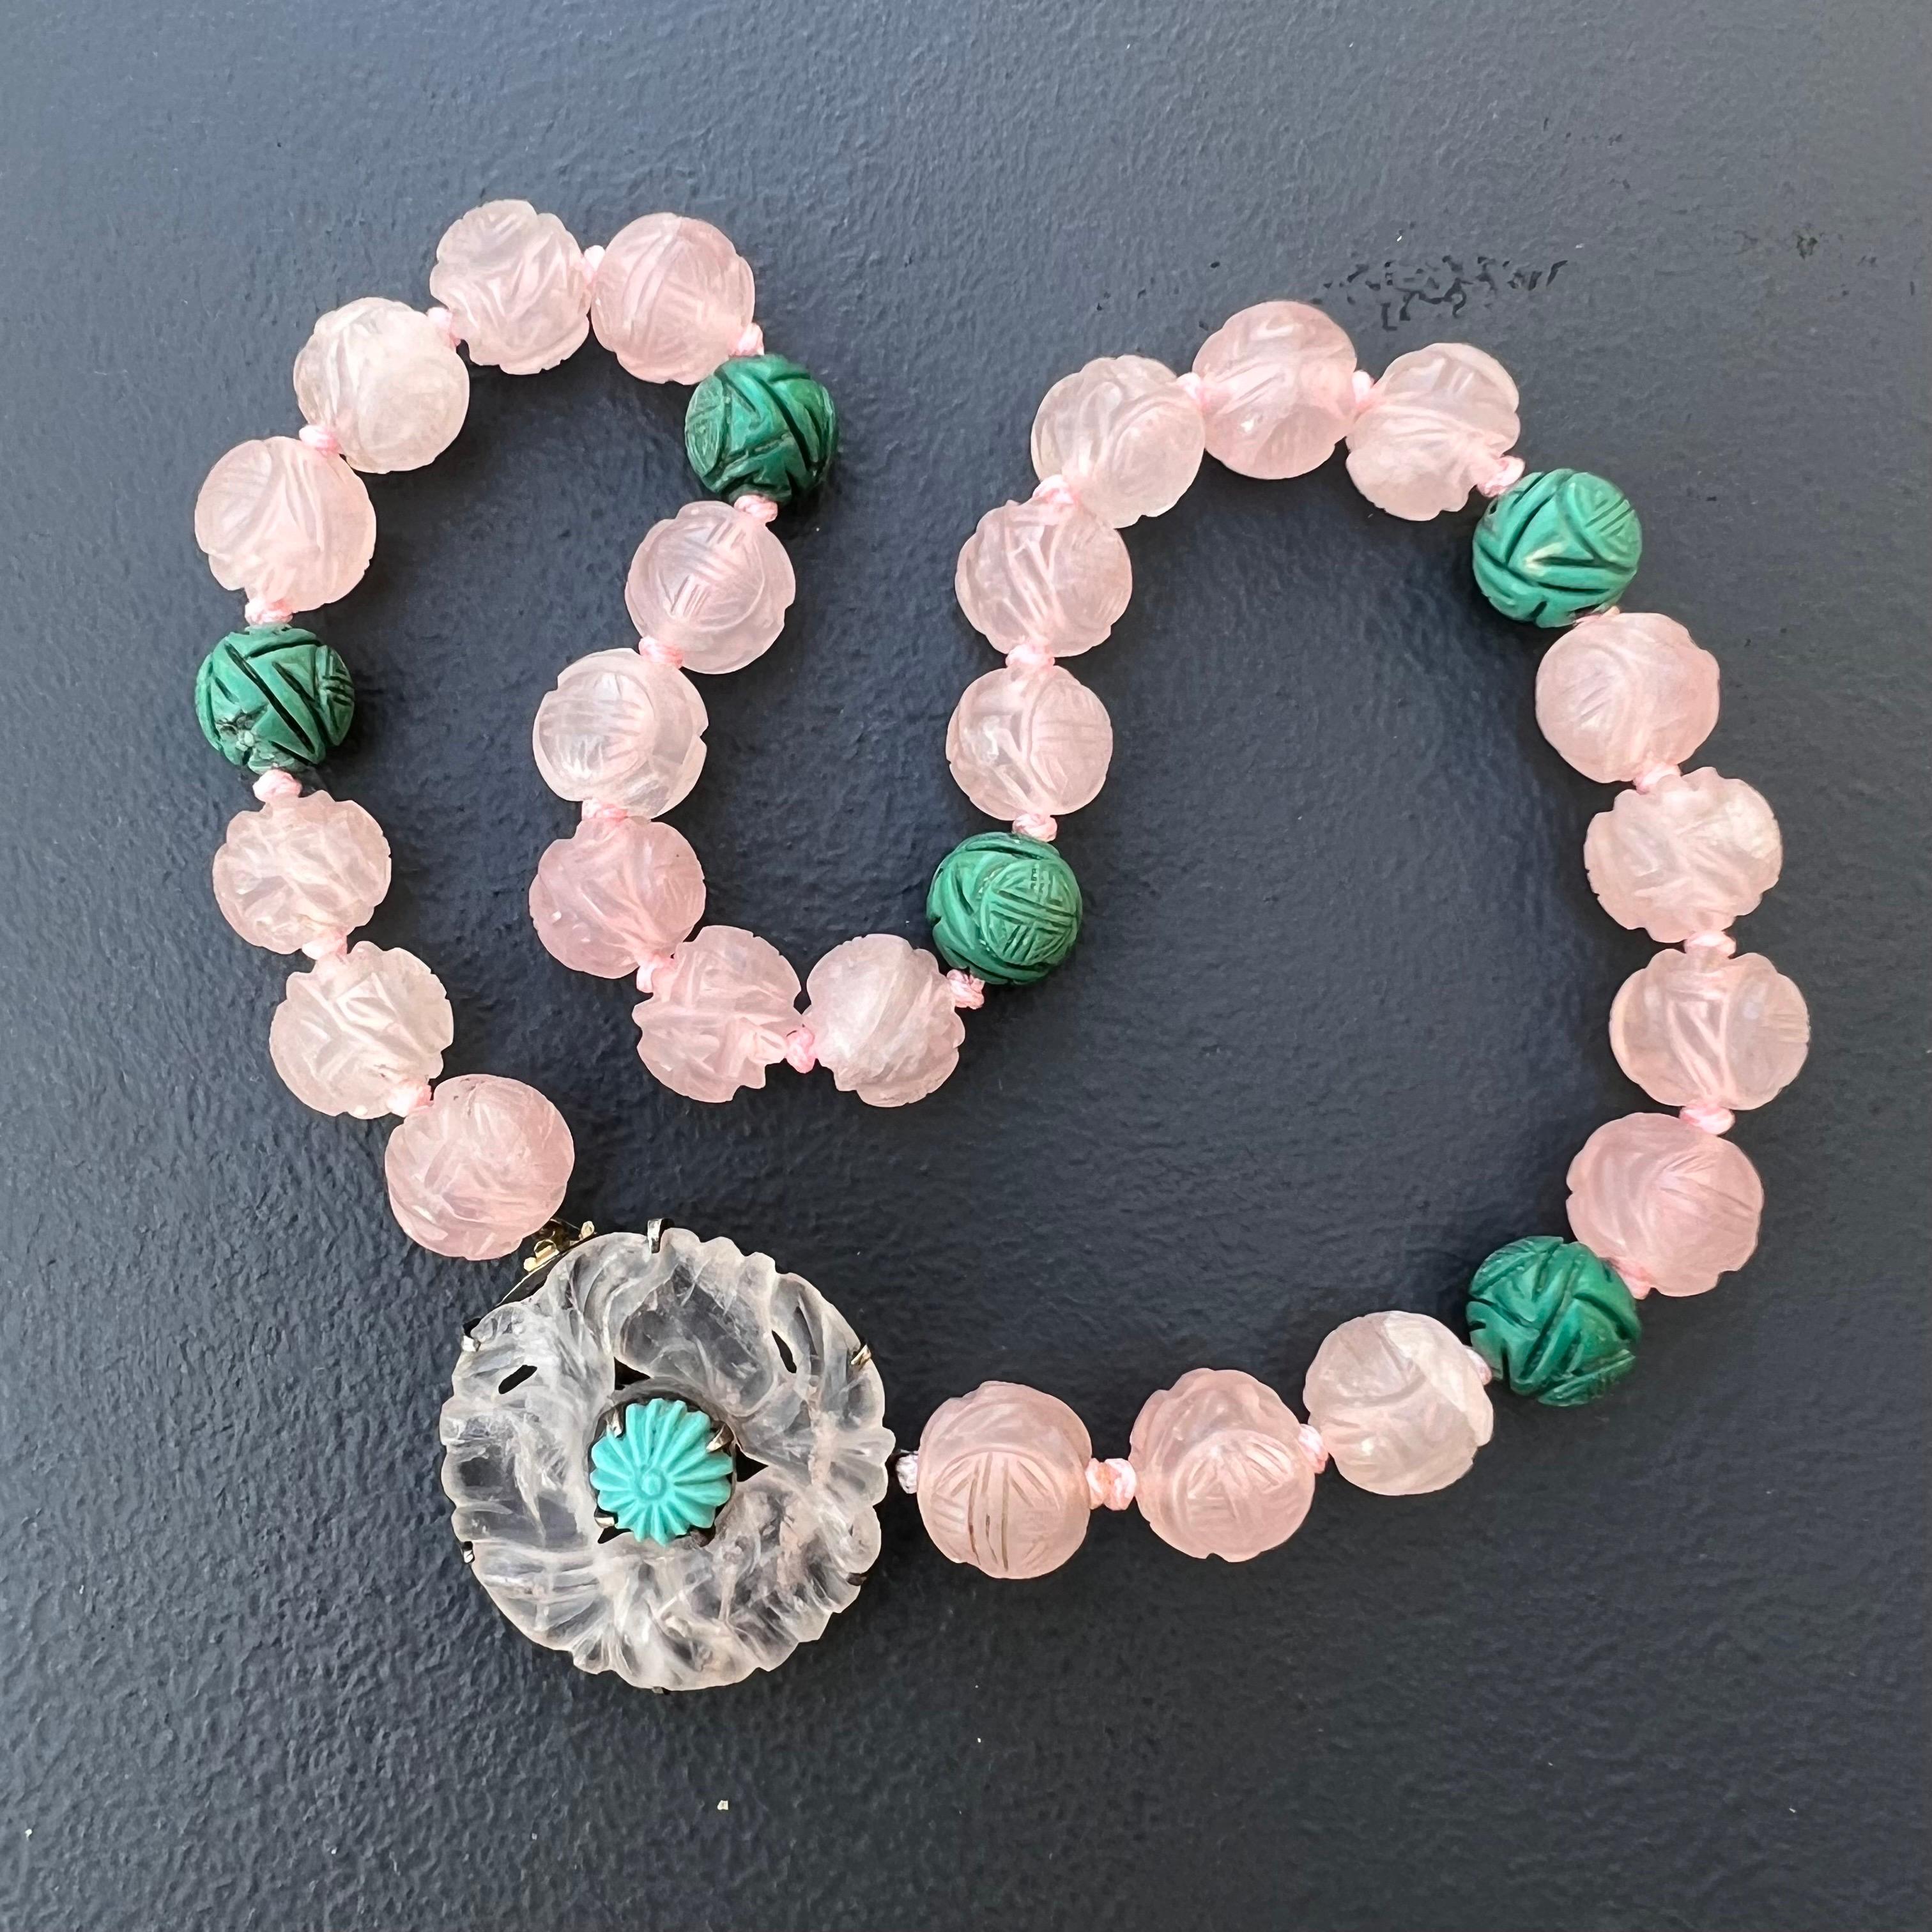 Art Deco Chinese export hand carved rose quartz and turquoise pendant beaded   necklace  . Beads are hand carved with Shou  mark . Central pendant features a pierced rose quartz disc which is set on an sterling silver frame , pendant acts as a clasp